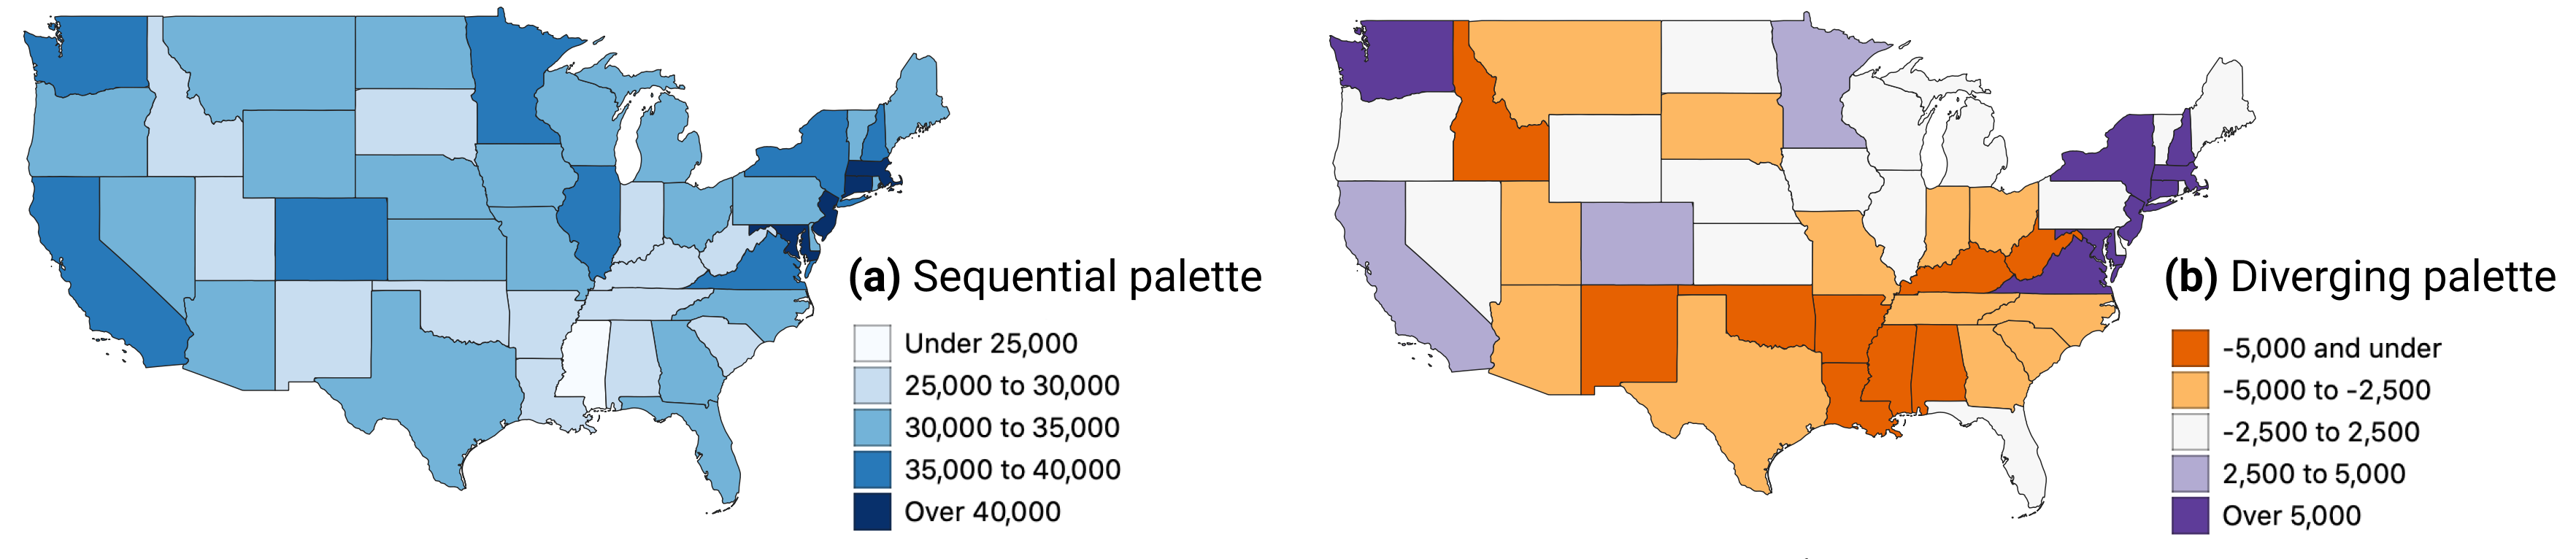 Sequential versus diverging color palettes to illustrate per capita income in US dollars in the contiguous states, from American Community Survey, 2018.